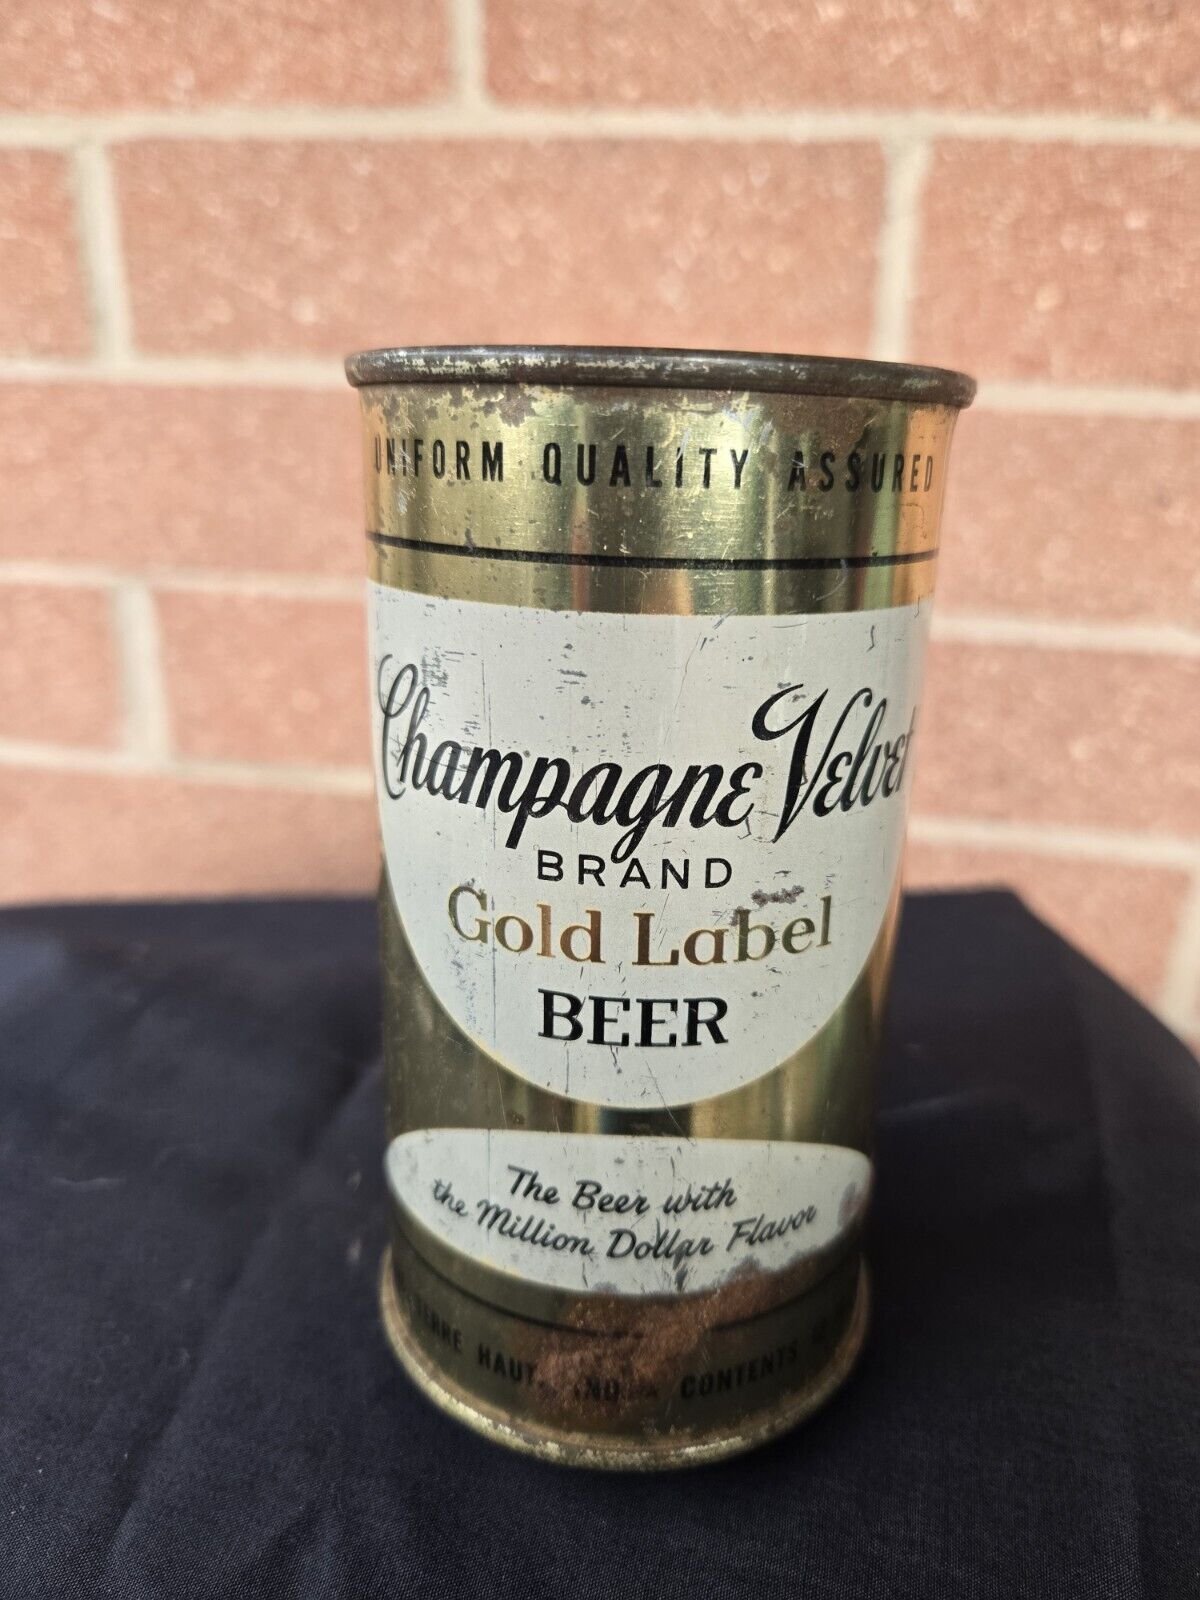 Champagne Velvet Brand Gold Label Beer Flat Top Can. Terre Haute, Ind.